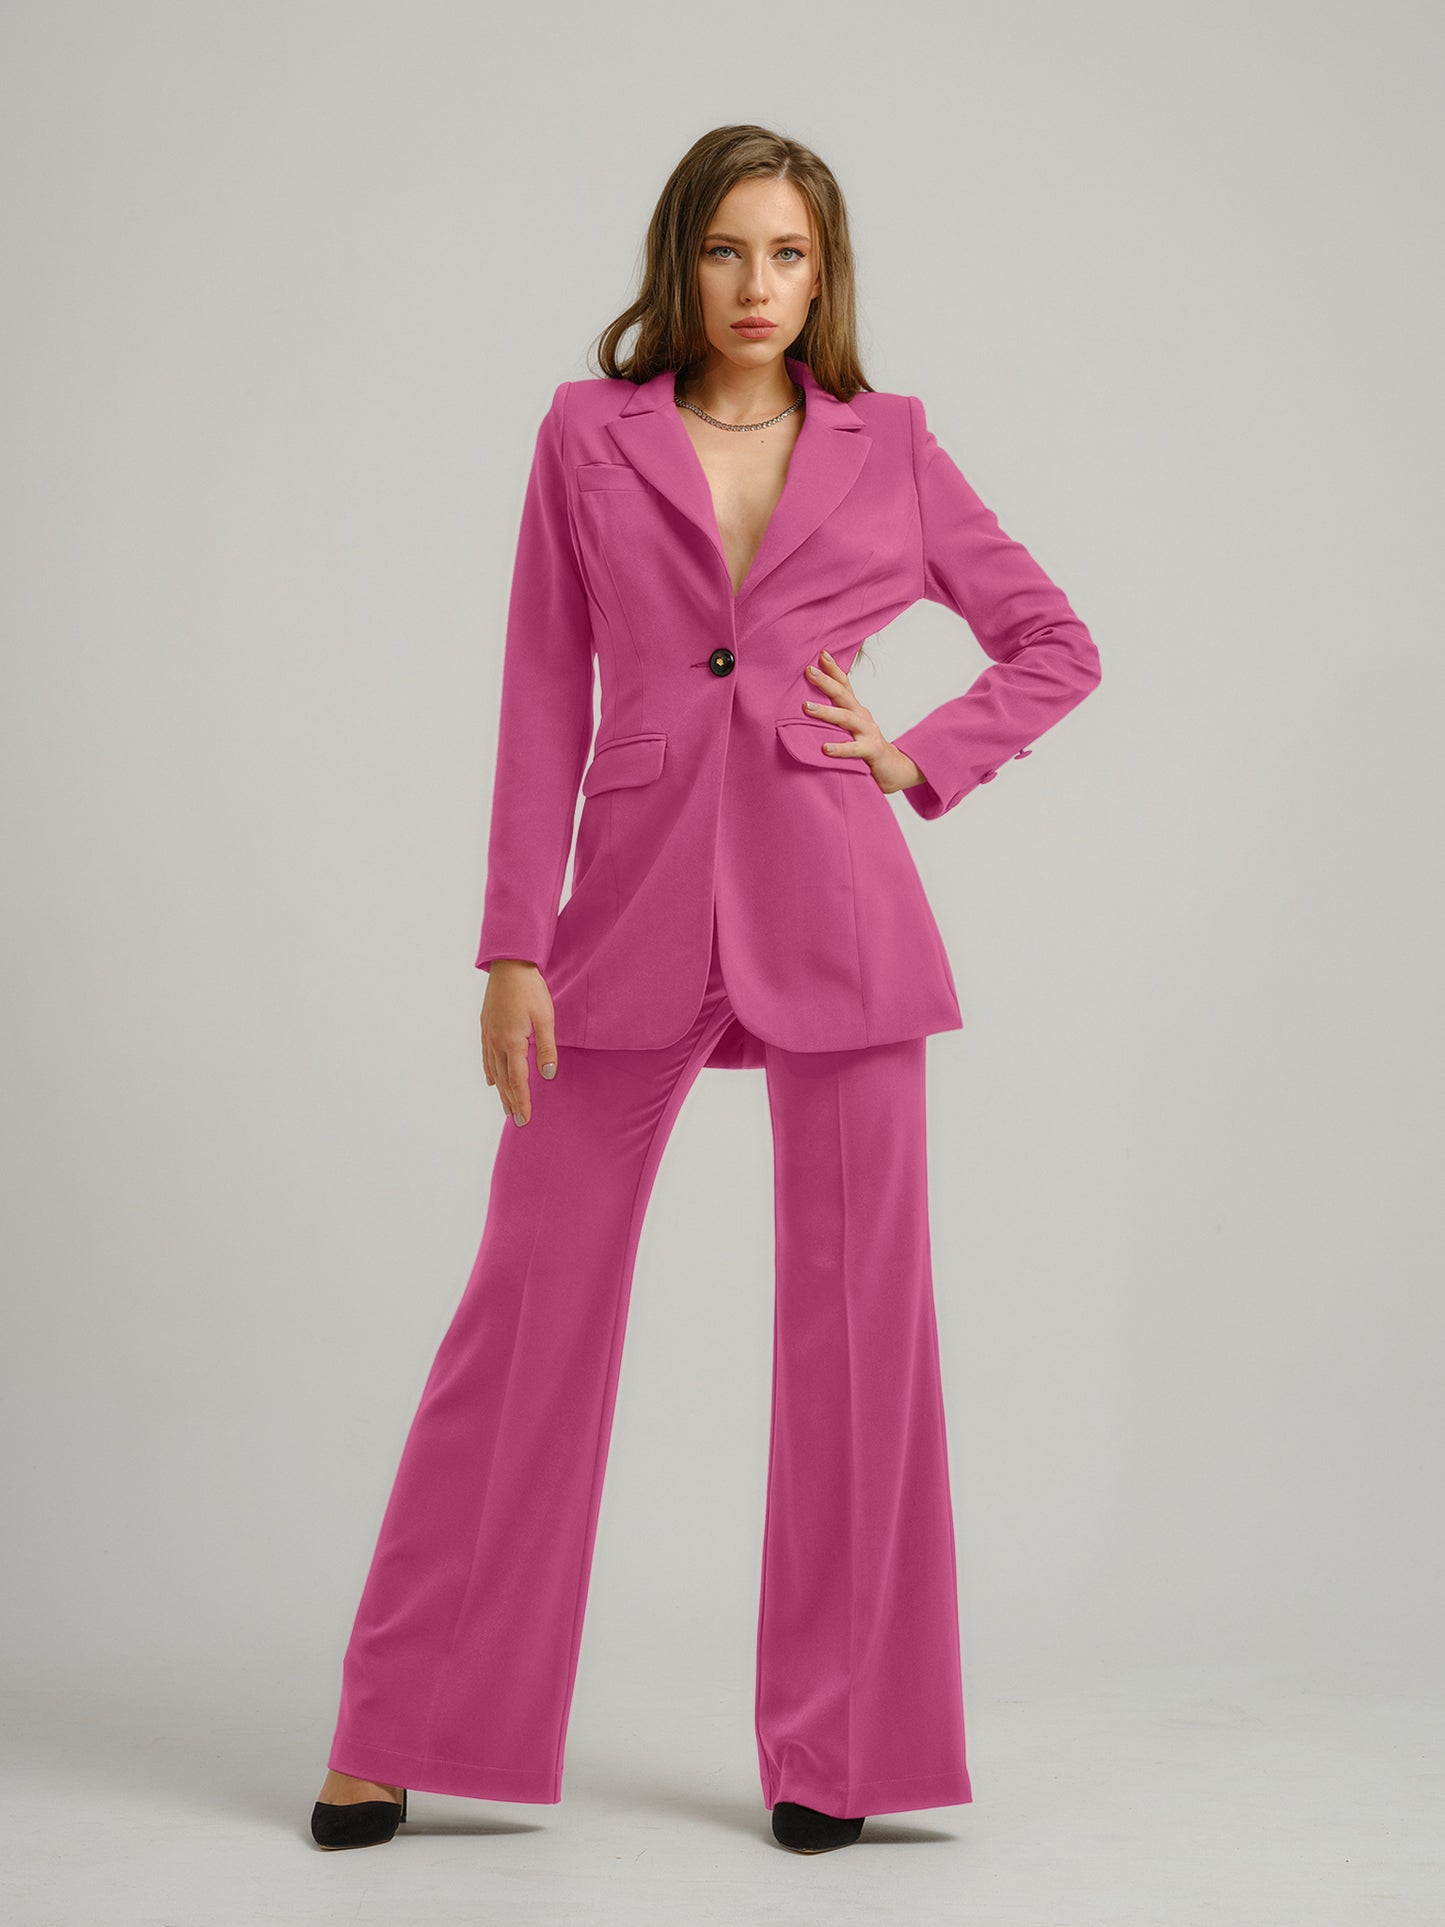 Tia Dorraine Sweet Desire Timeless Classic Blazer The thigh-length blazer is one of our favourite pieces. This statement piece features a single large button closure that emphasizes its streamlined design. It stands out with its structured shoulders, beau